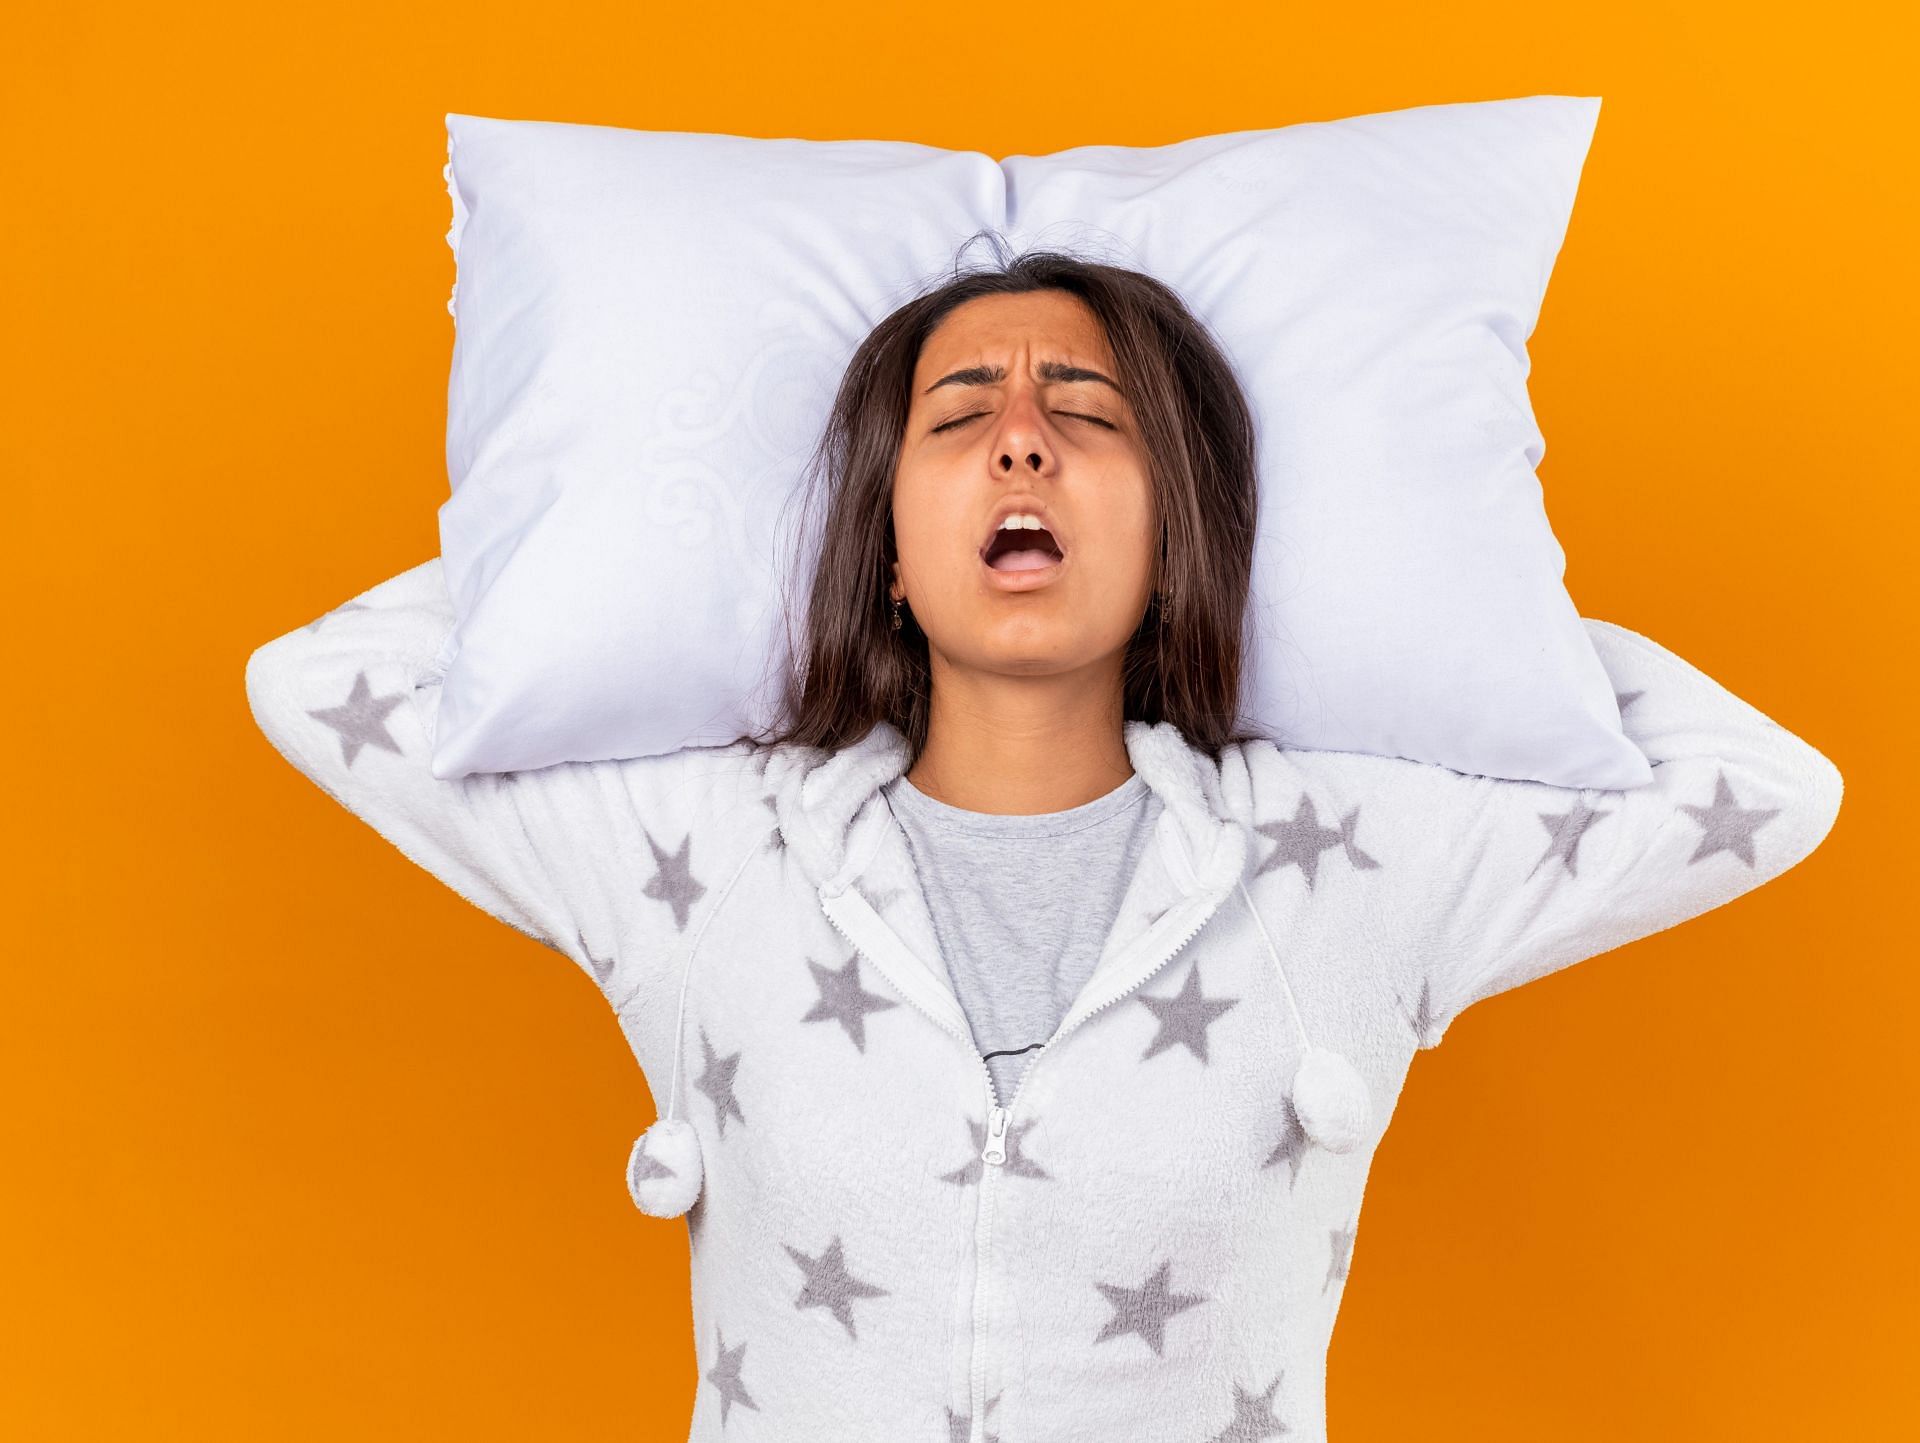 What causes drooling while sleeping and how we can prevent it? (Image via Freepik/ Stockking)